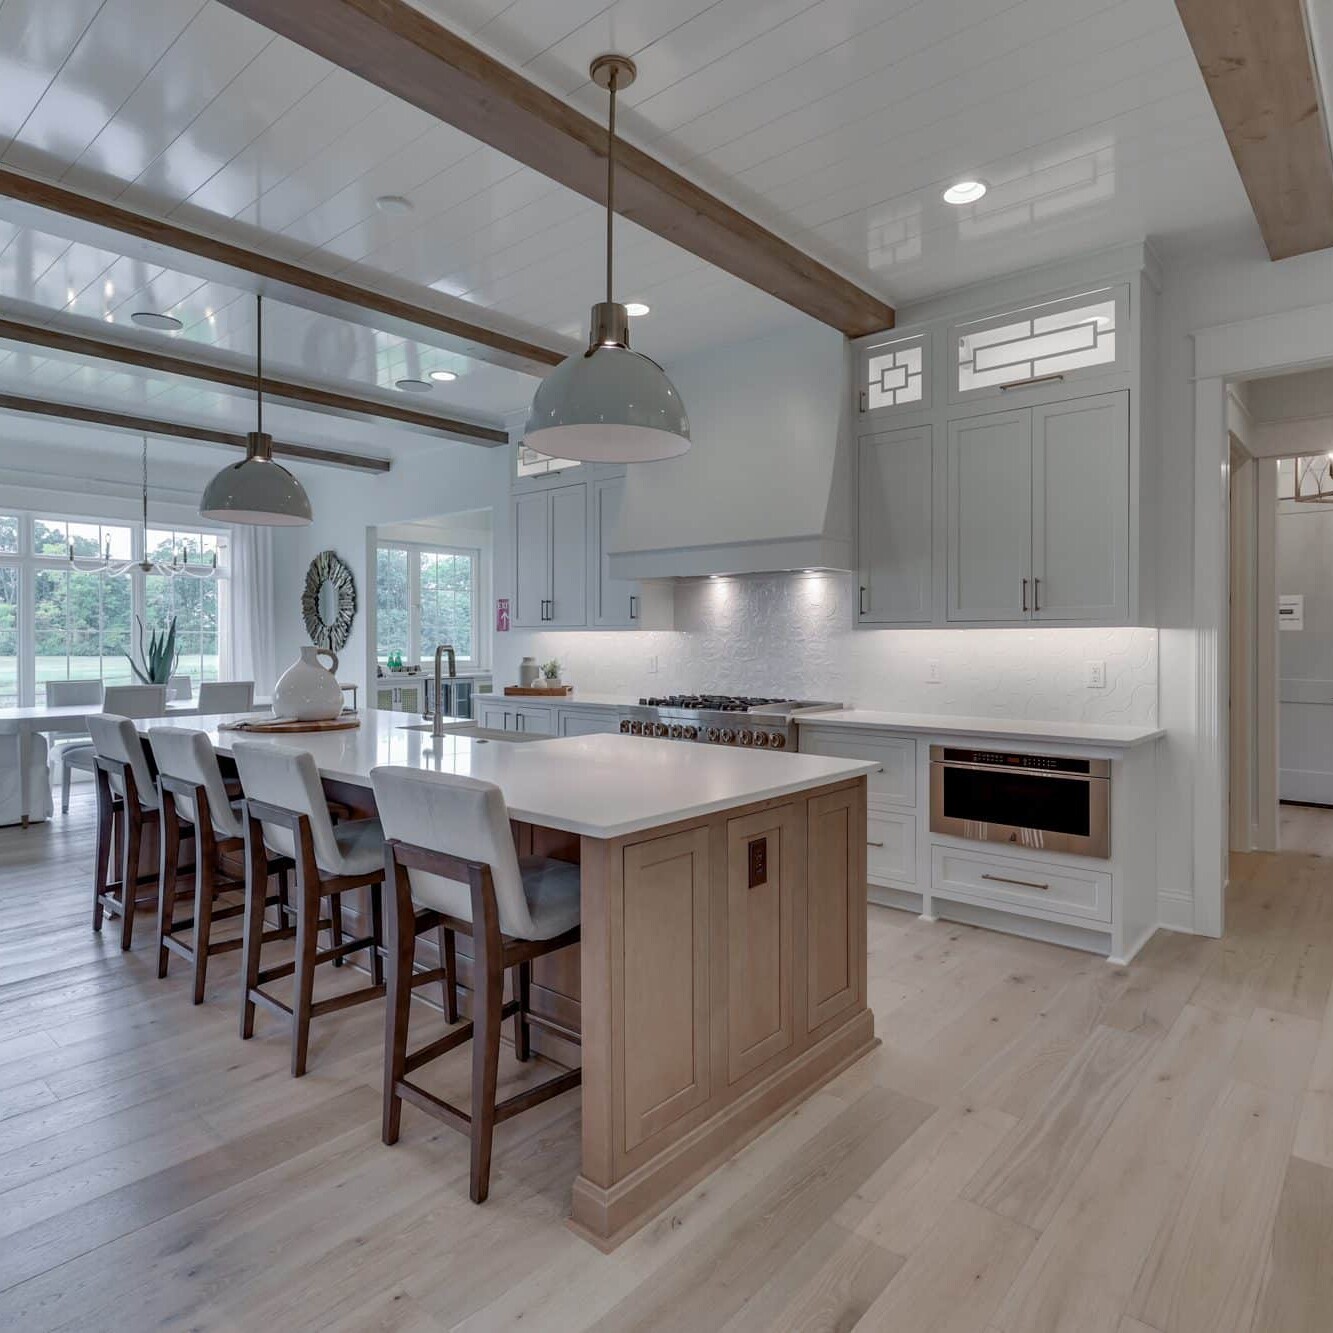 A large kitchen with wood beams and a center island.